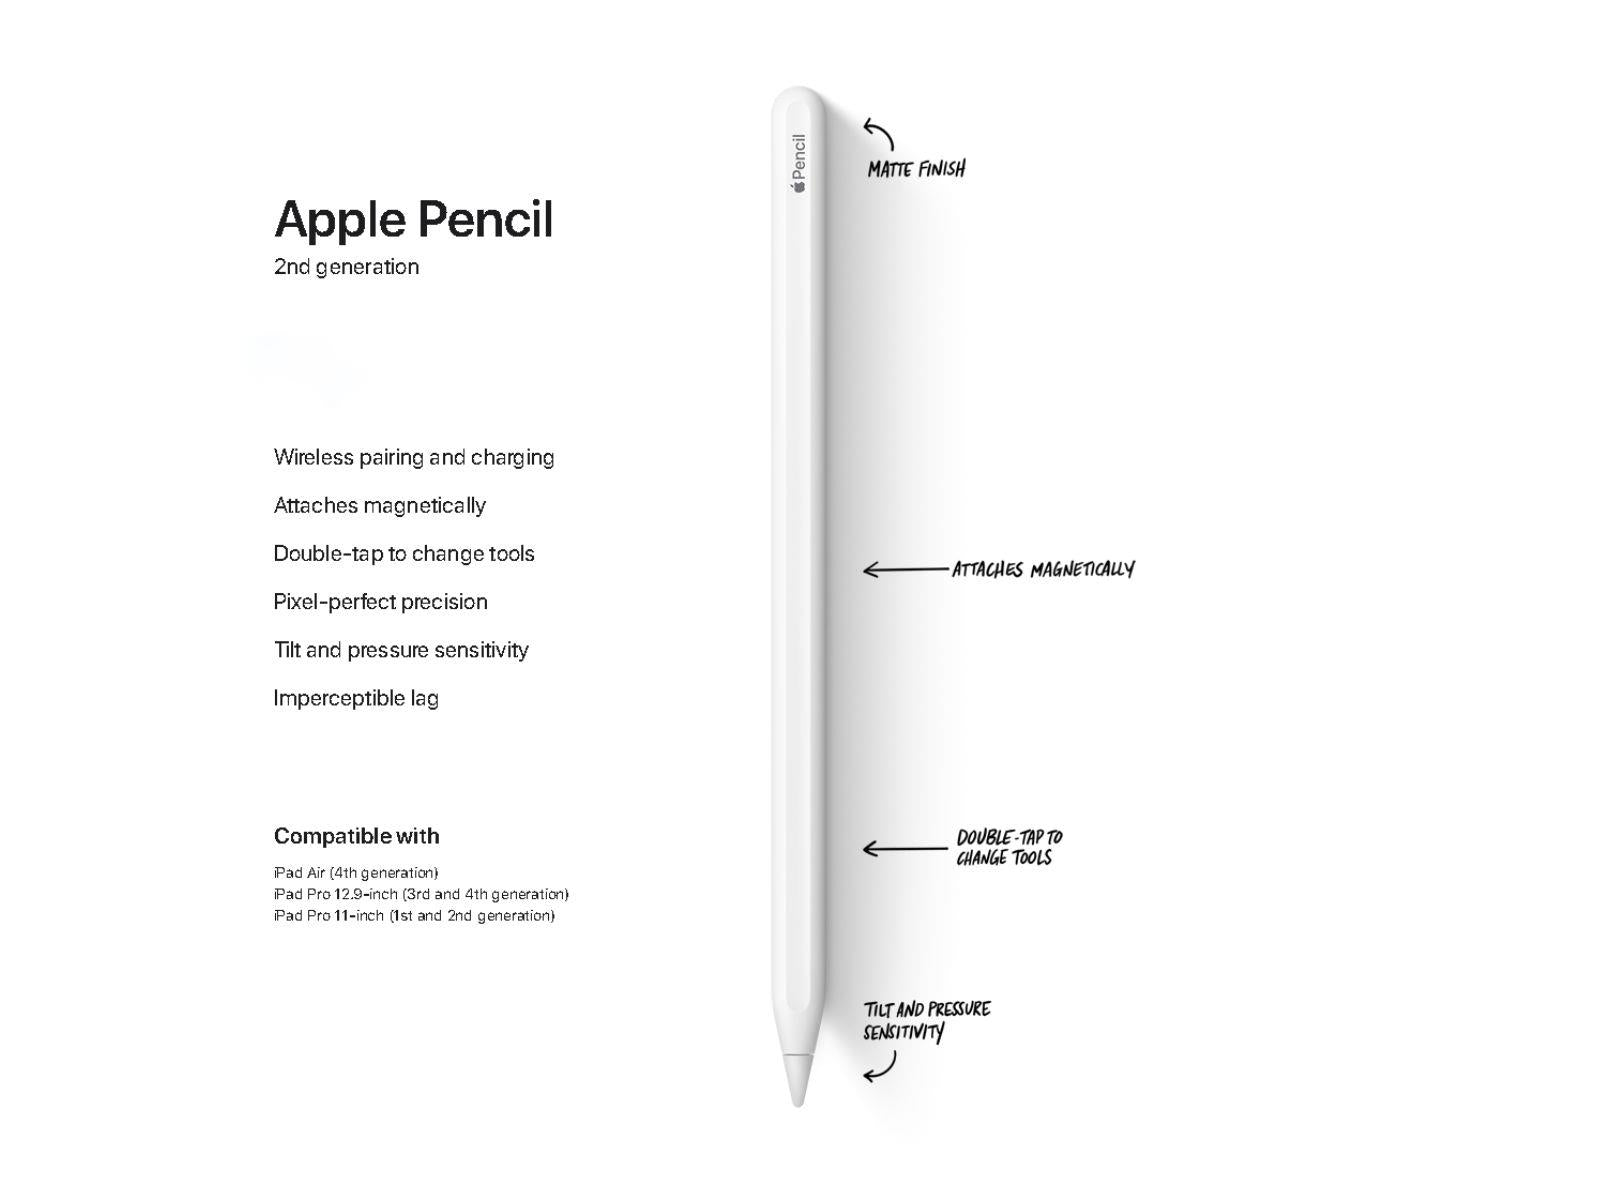 Image shows the features of the Apple Pencil 2nd Generation labelled